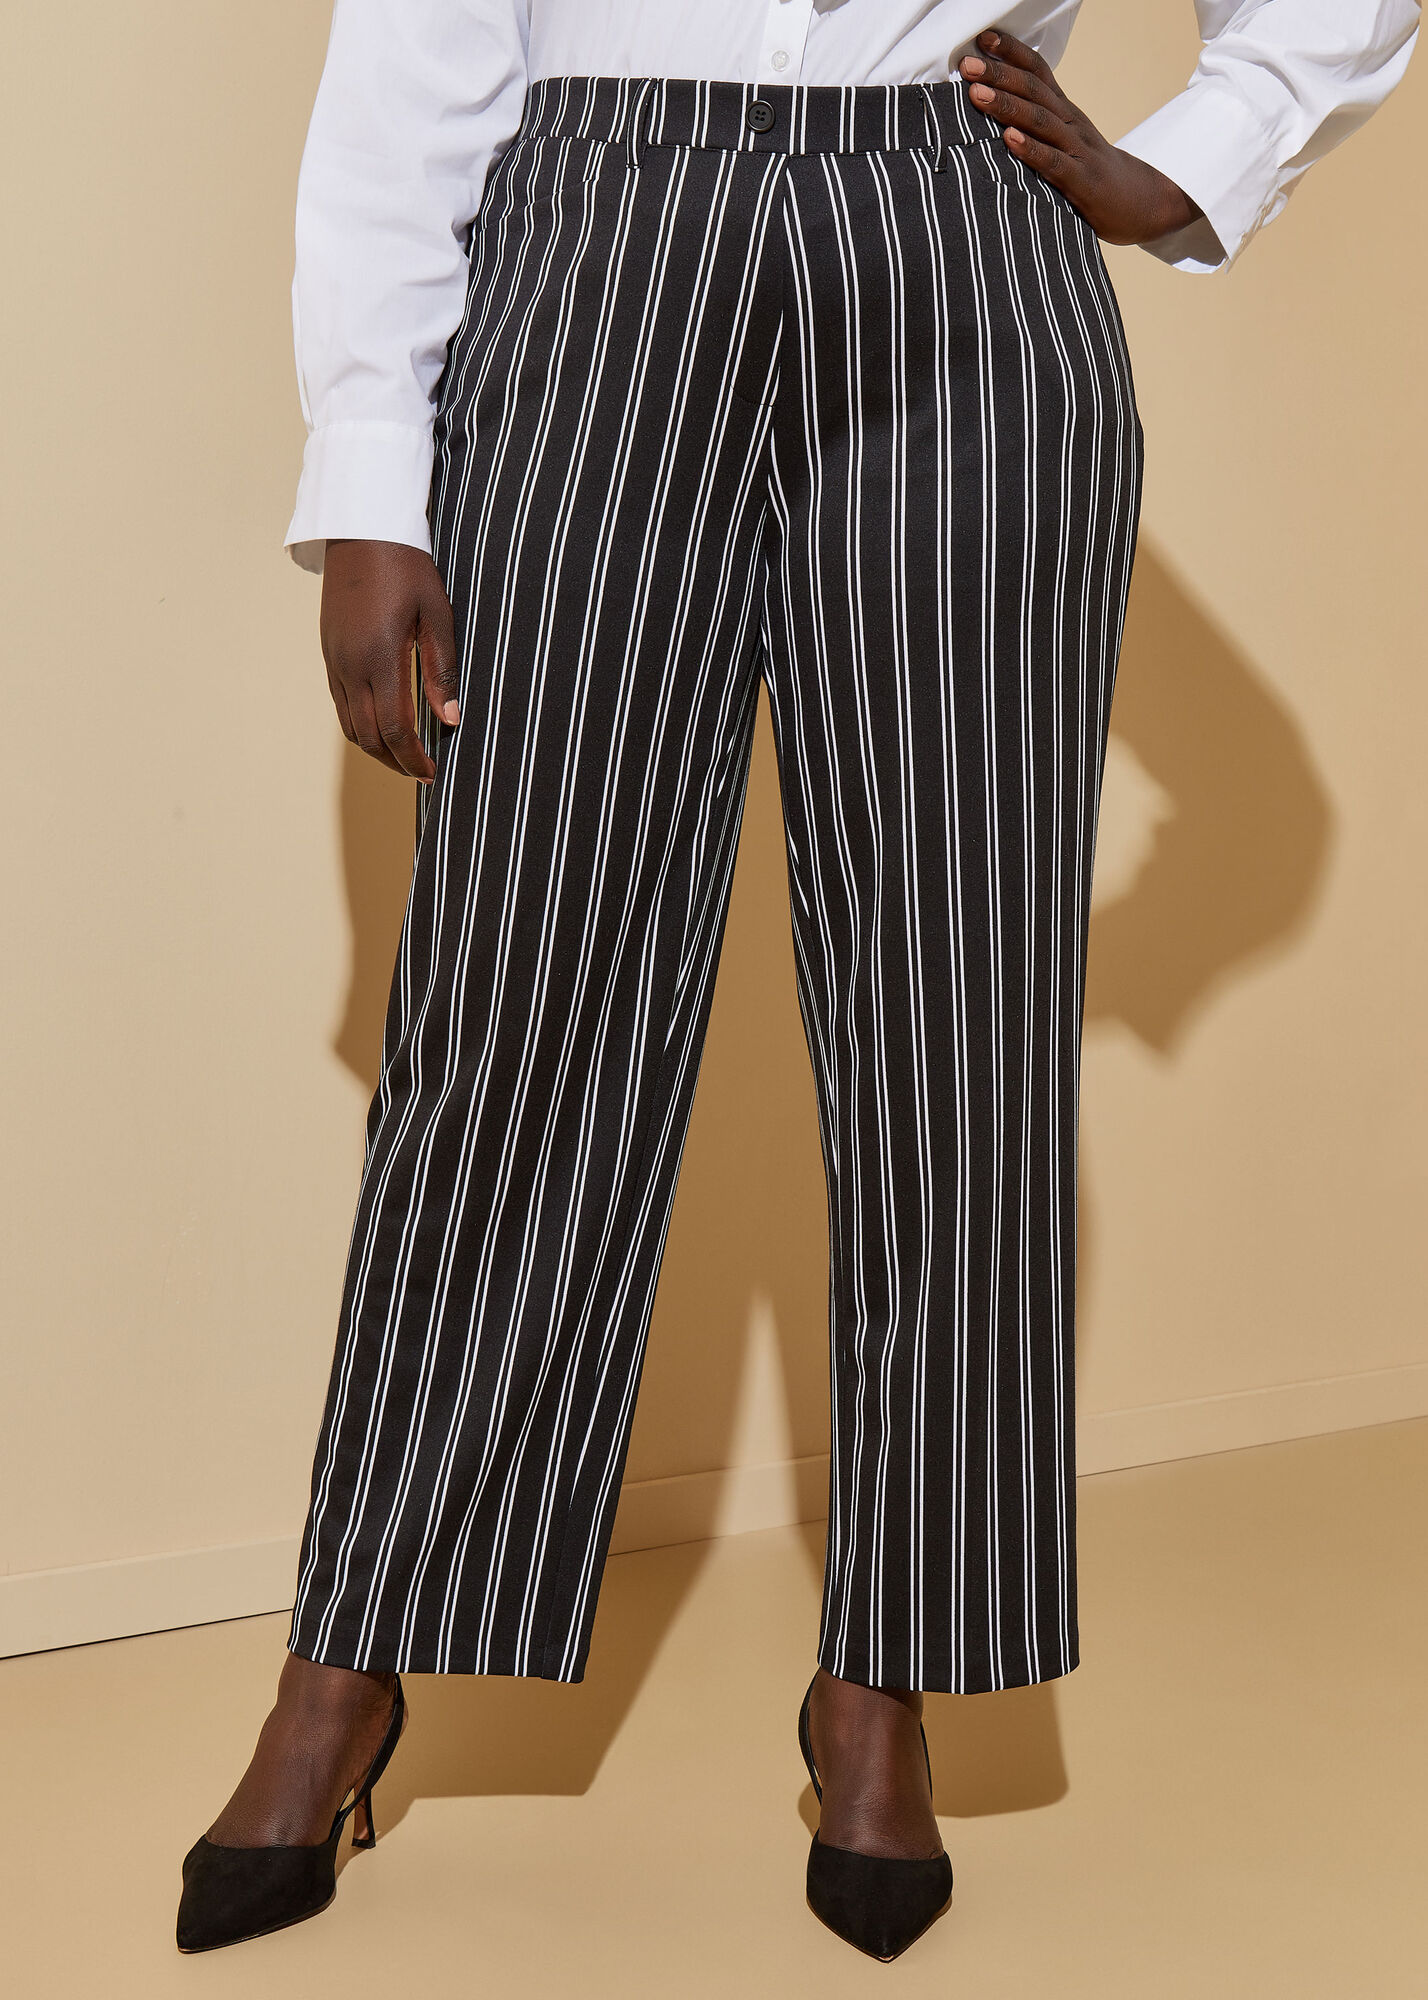 Pin on Trousers - Pants